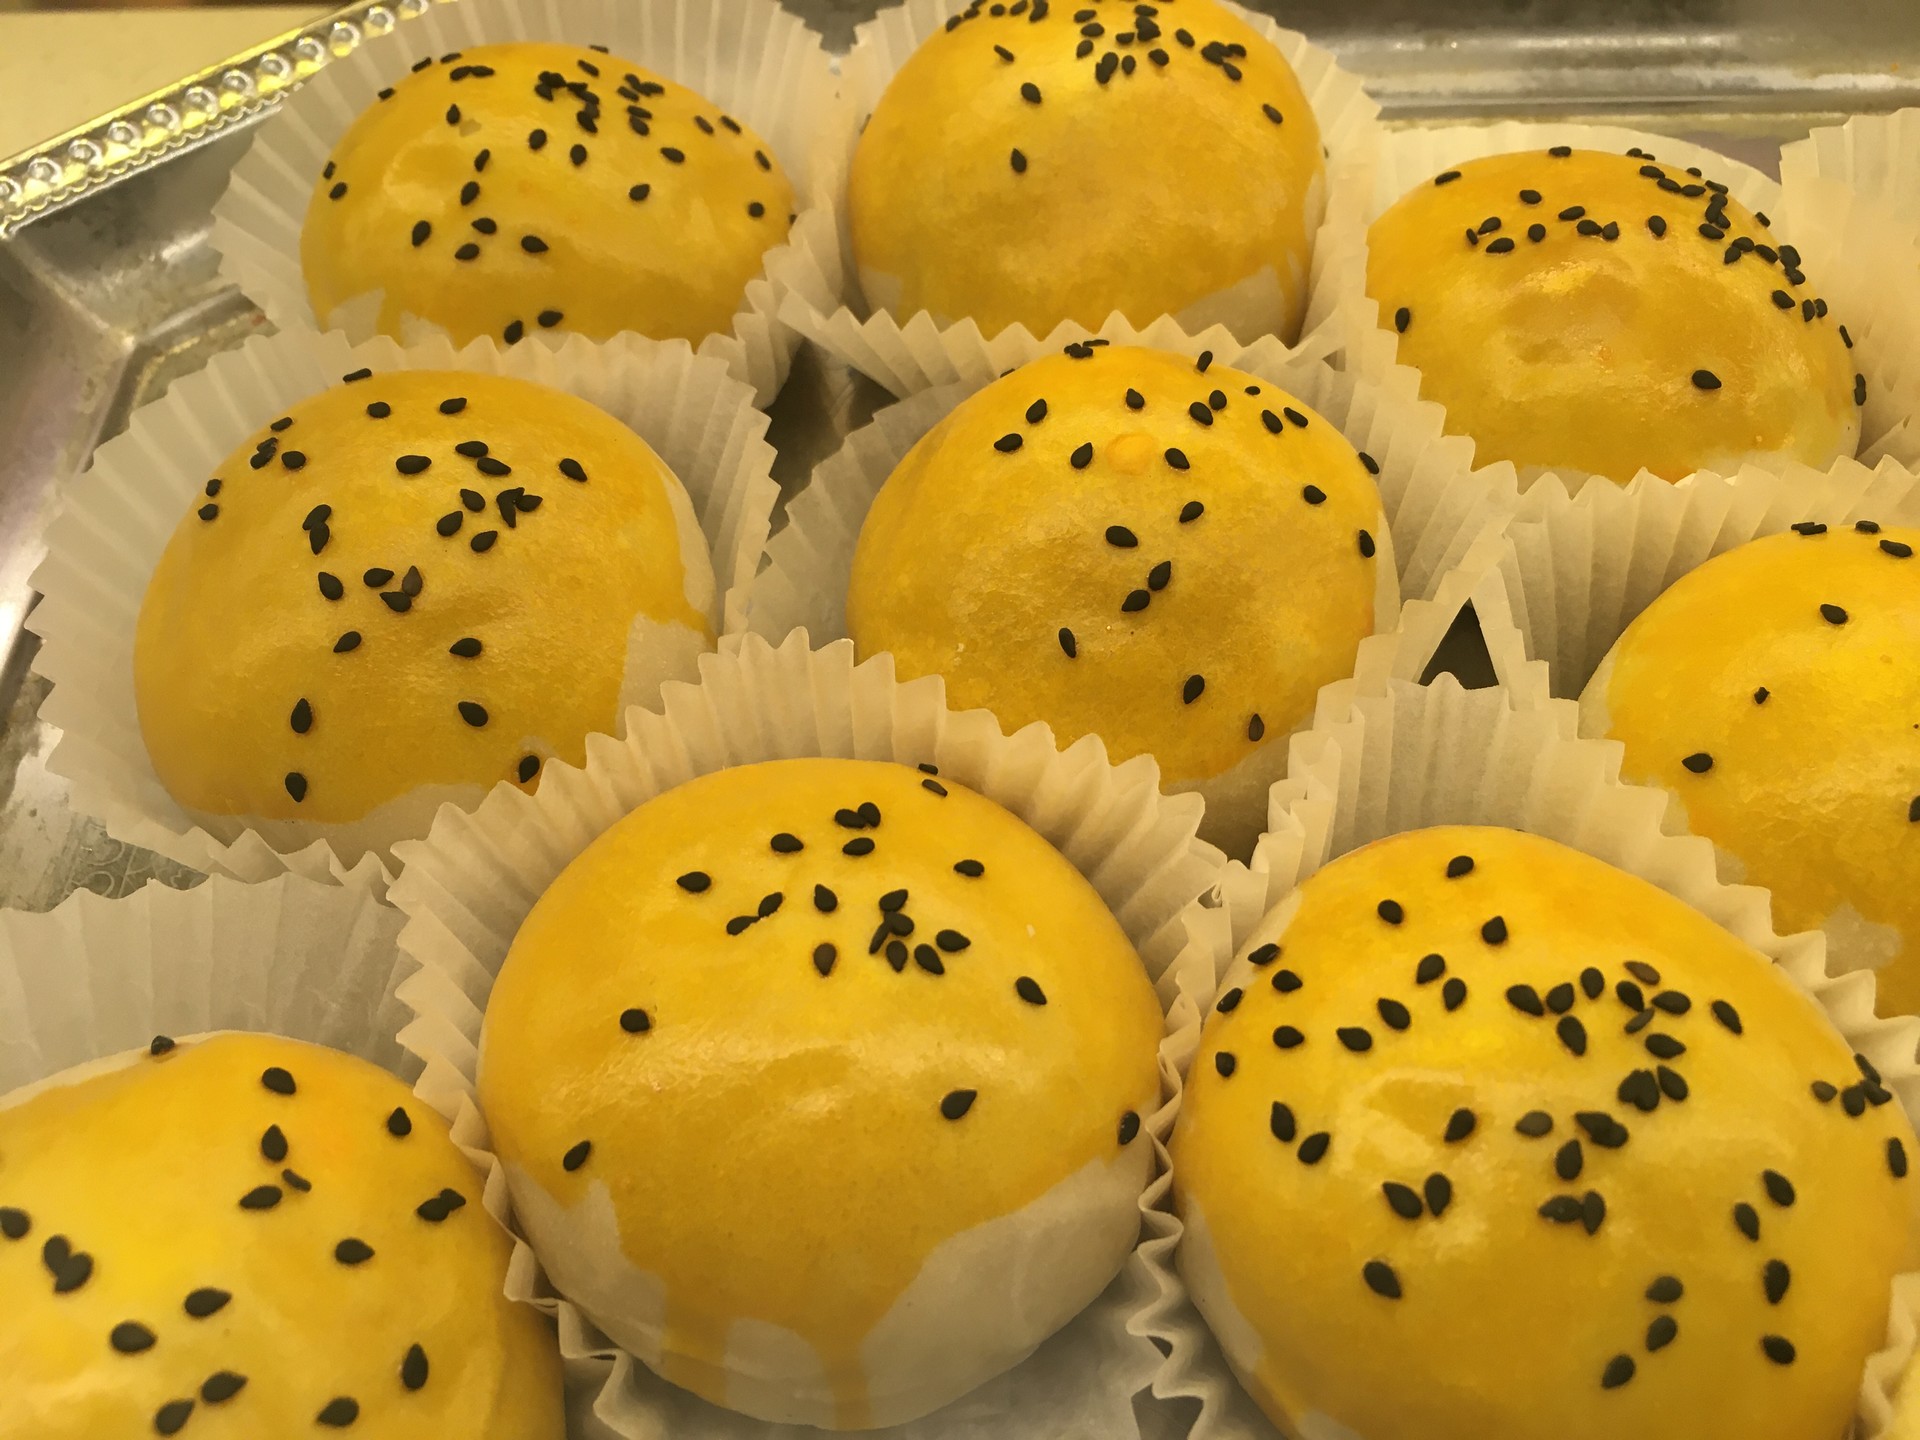 Salted egg yolk buns at Dzui’s Cakes and Desserts in San Jose.